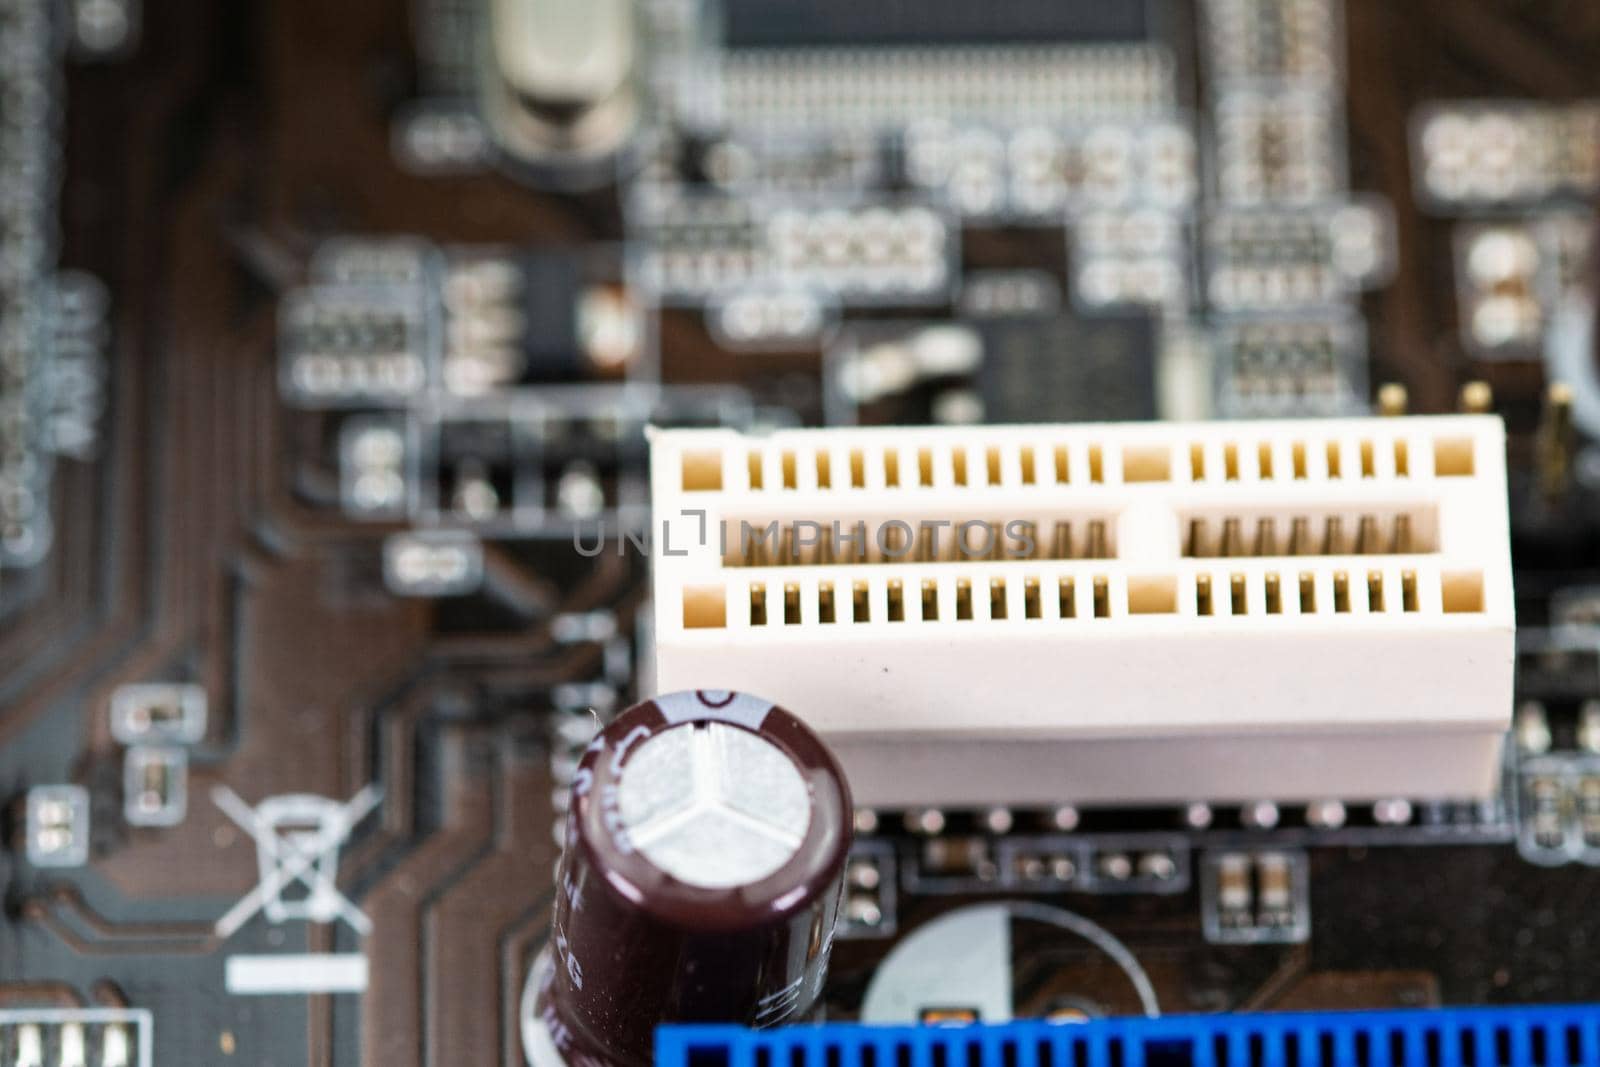 connectors of a computer motherboard by carfedeph